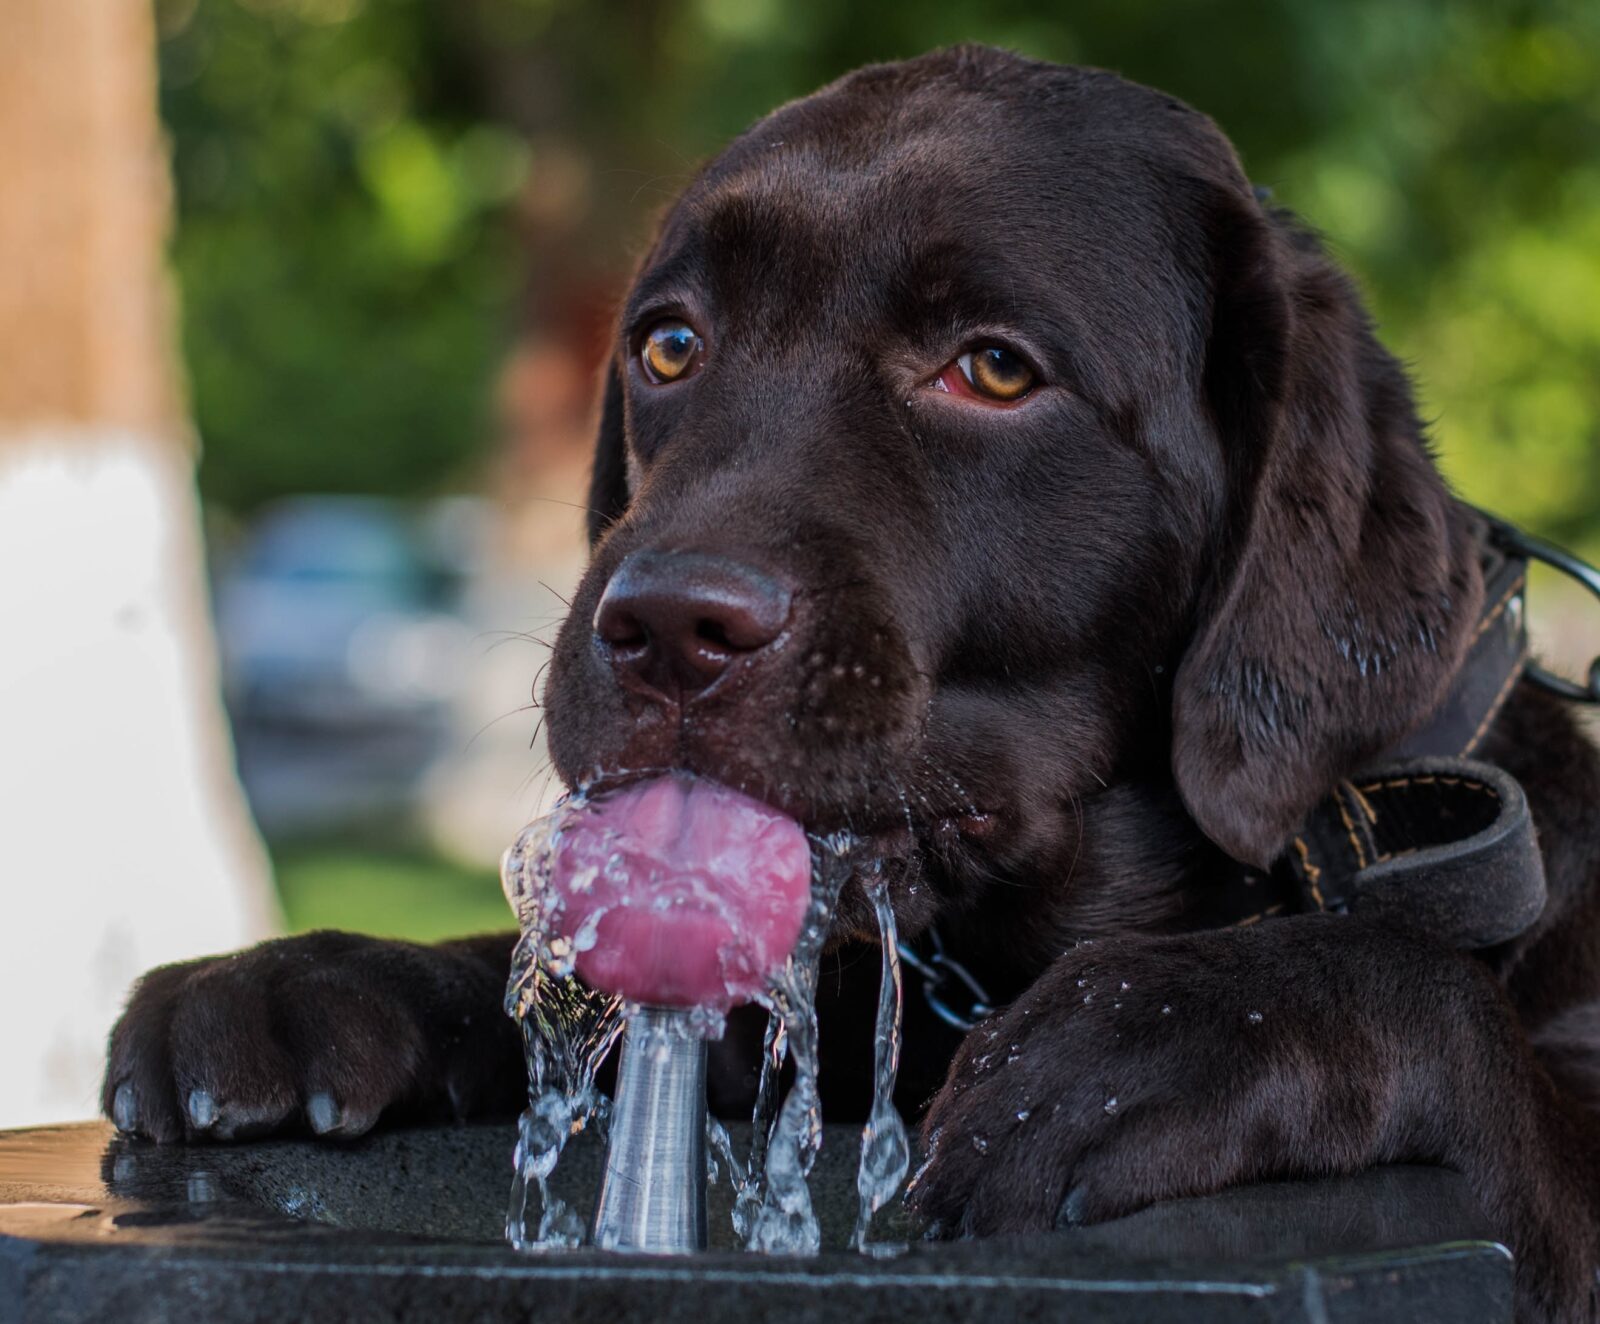 How Much Water Should a Dog Drink?